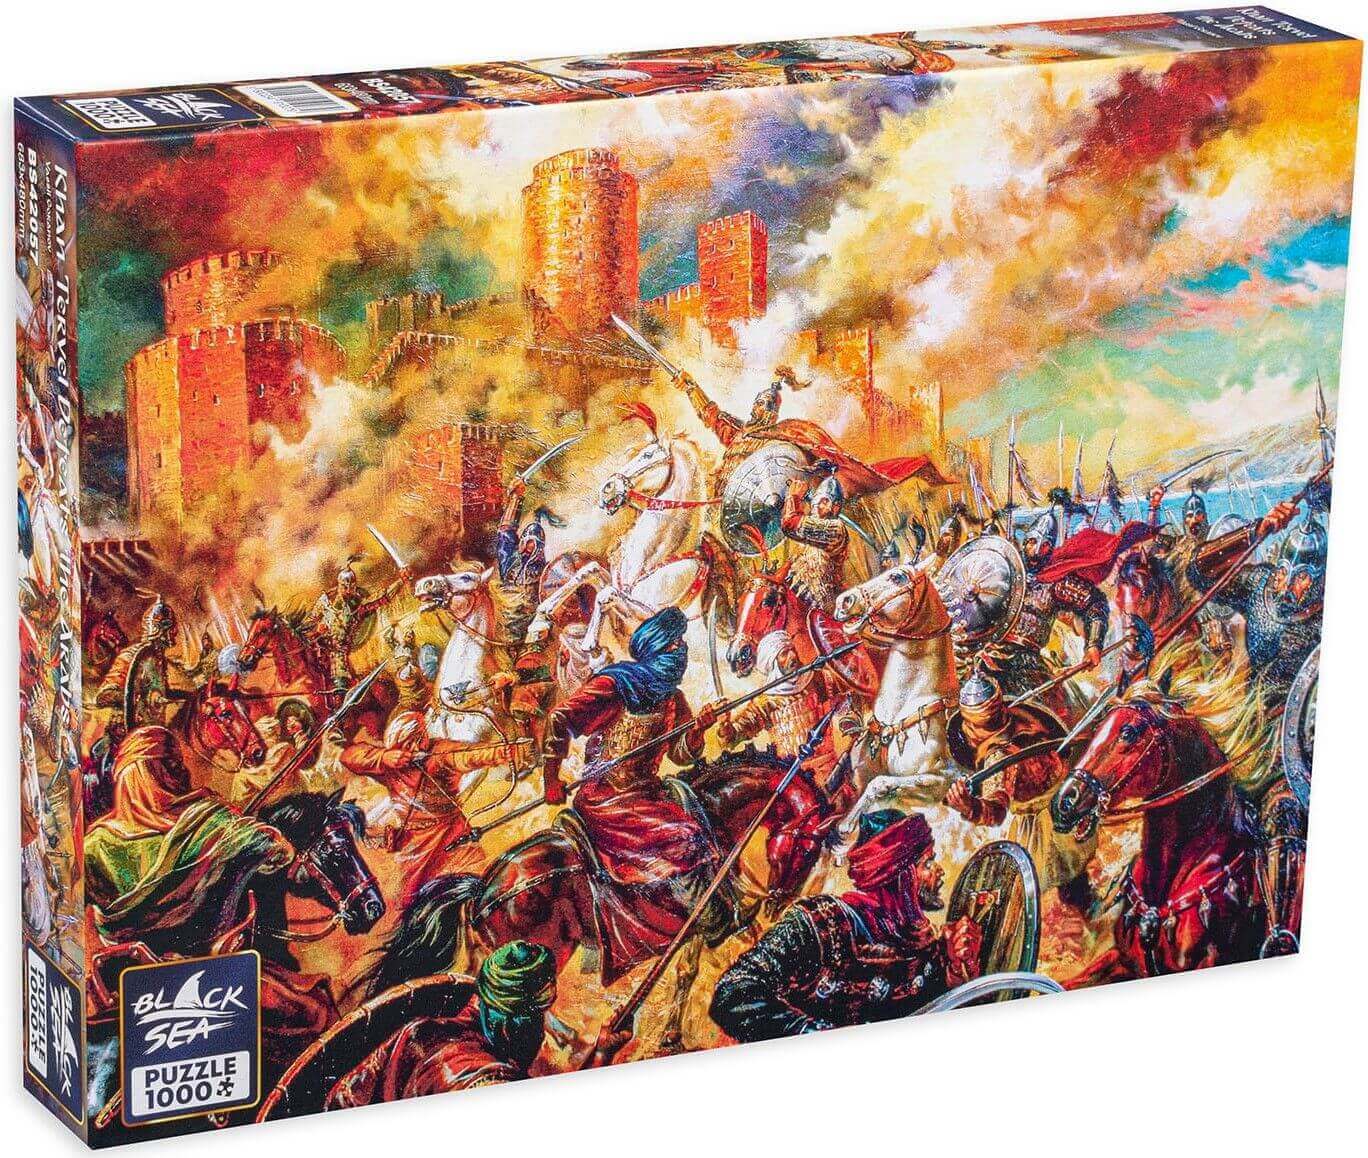 Puzzle Black Sea Premium 1000 pieces - Khan Tervel Defeats the Arabs, 13 centuries ago Europe's destiny and the future of the continent was decided on the Balkans. One of history's most glorious moments is the battle between the Arabs and Khan Tervel who